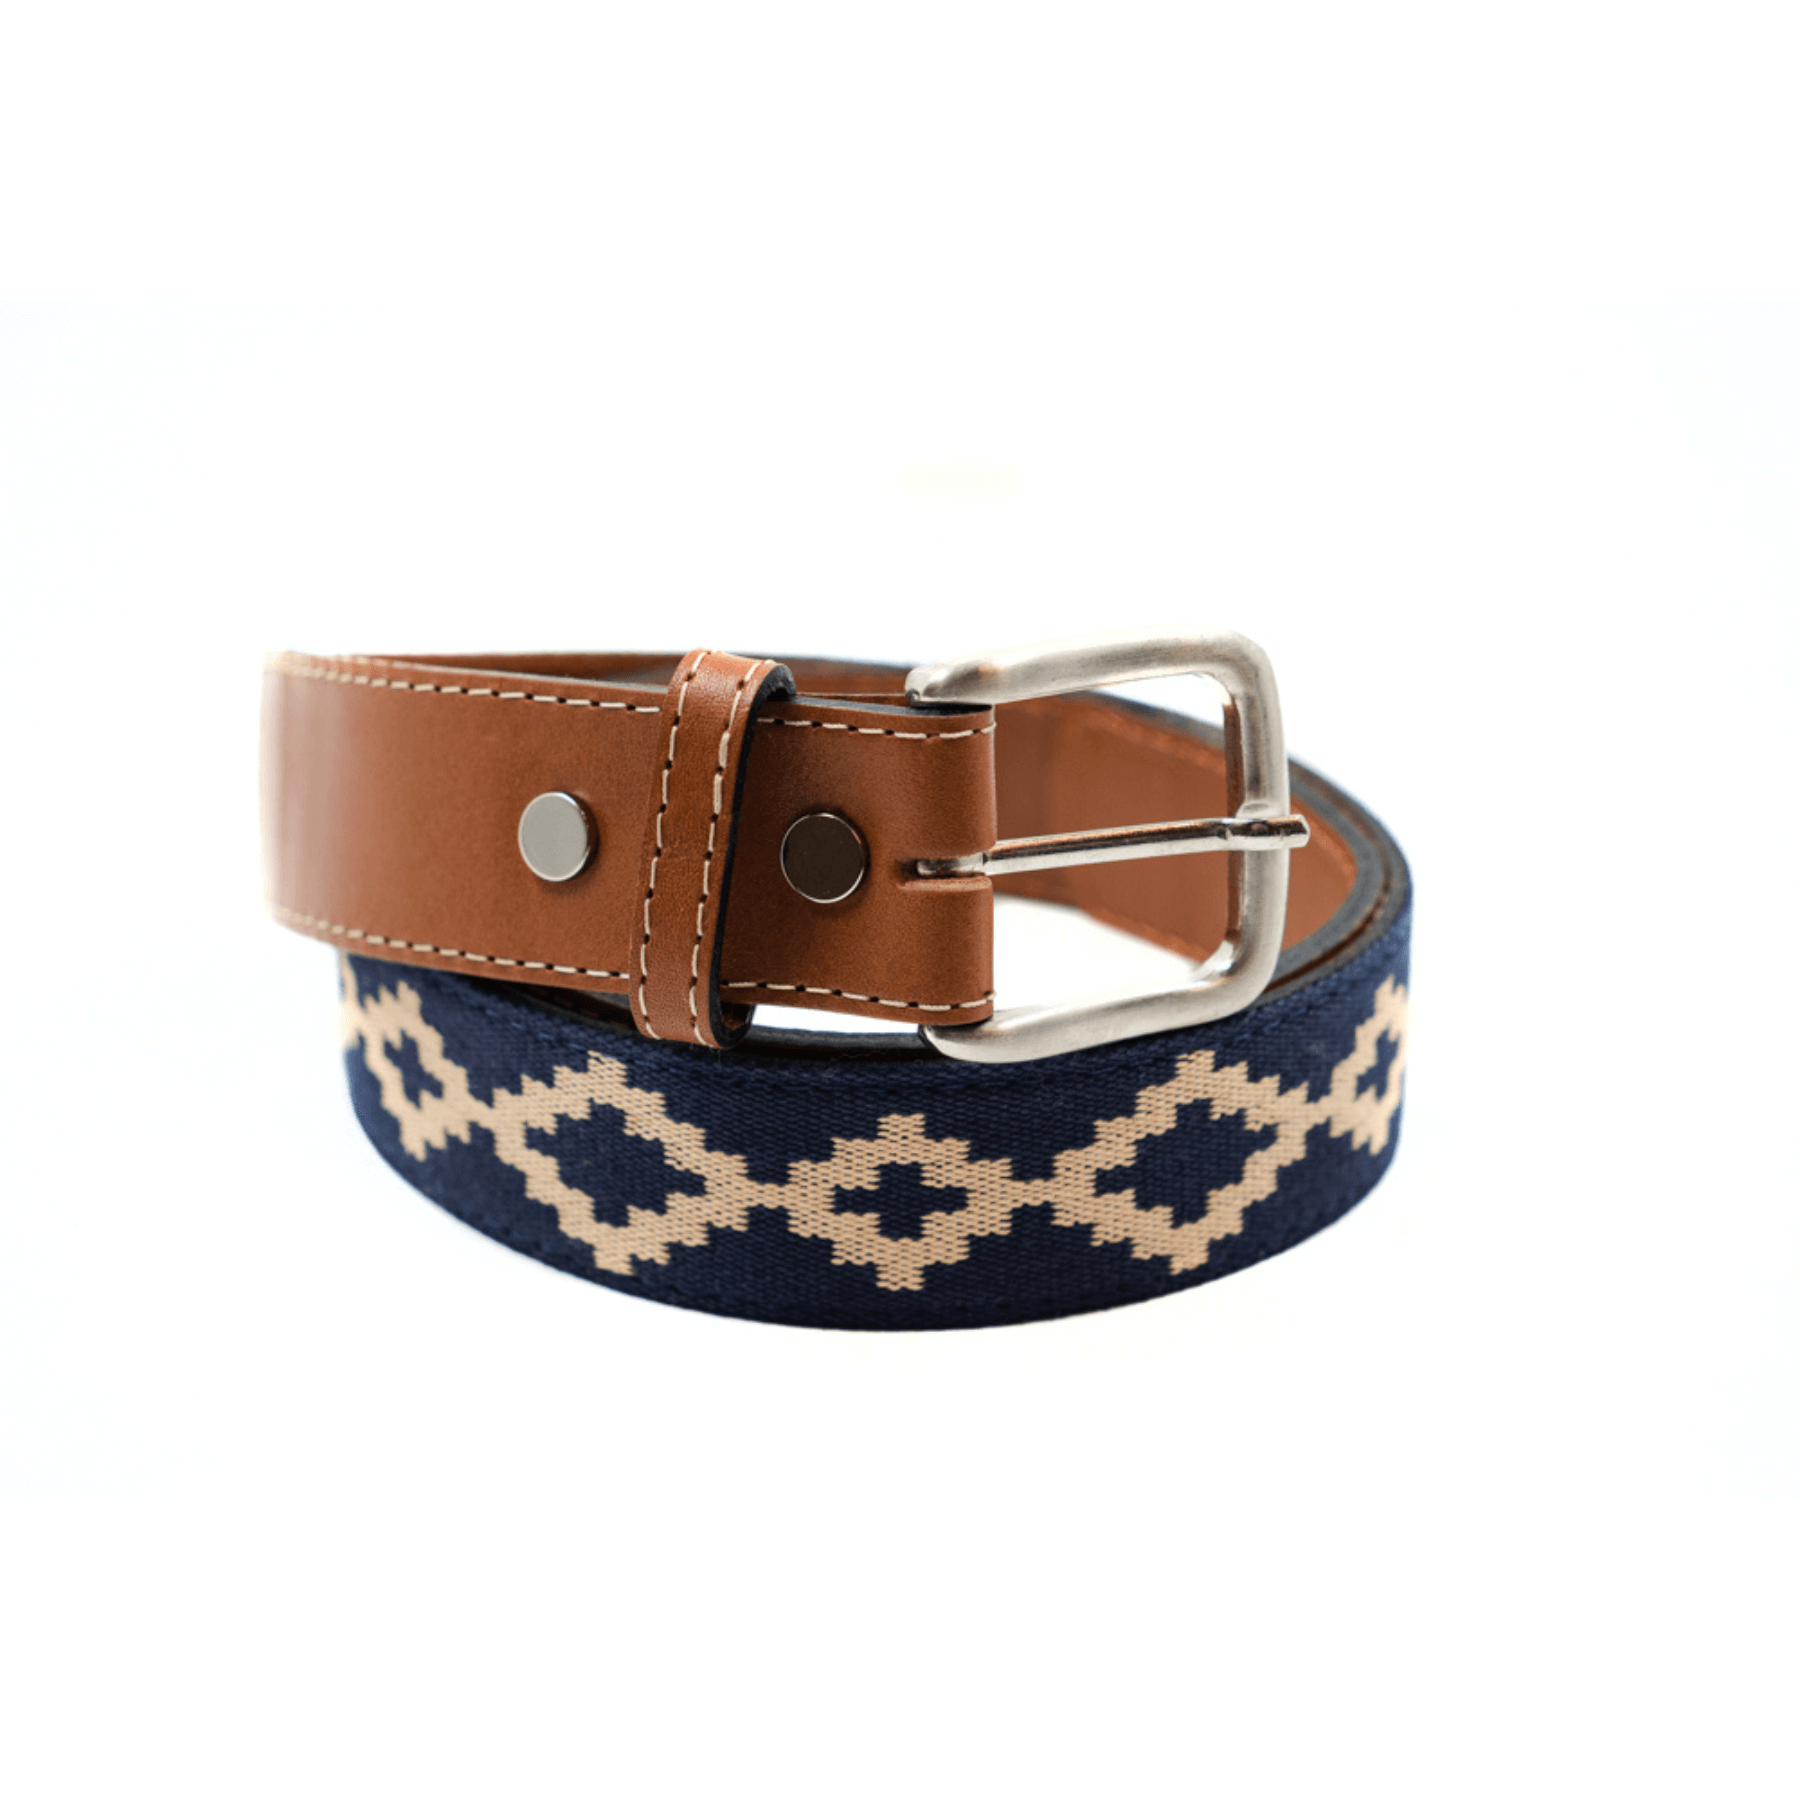 Gaucholife Belts Interchangeable Buckle Leather and Guarda Pampa Belt